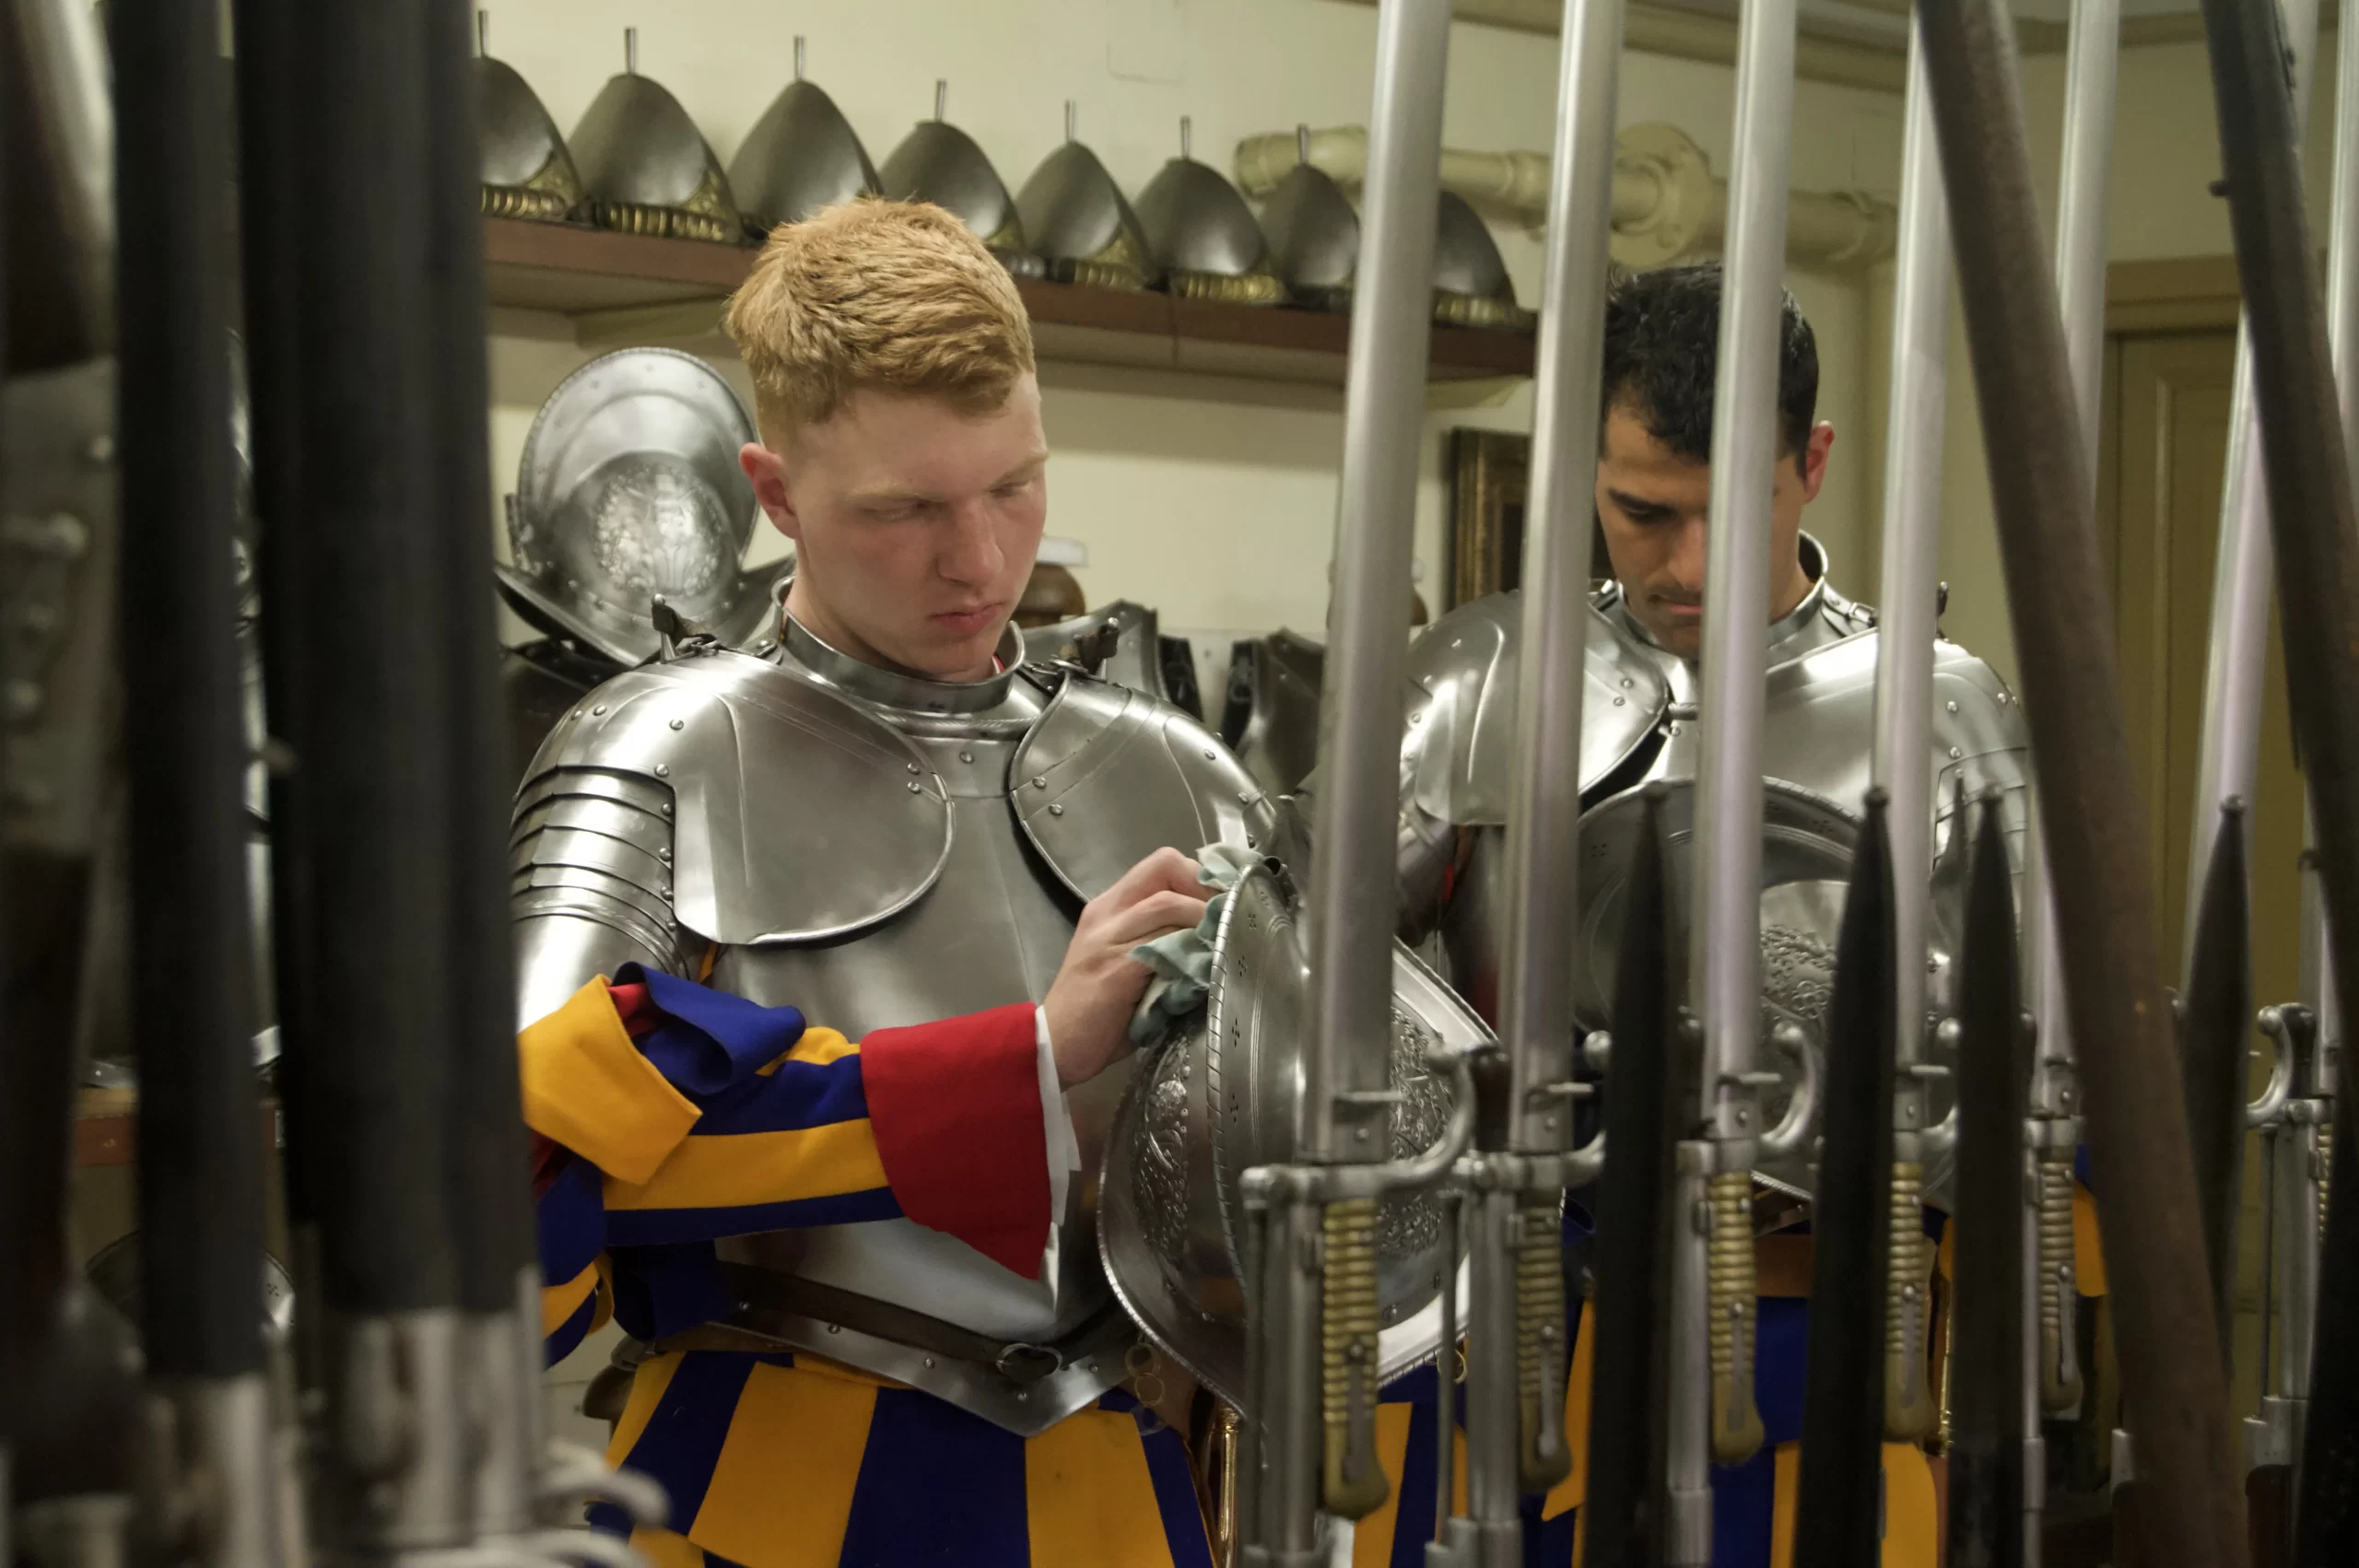 Swiss Guard cadets inspect their armor in their barracks at the Vatican on April 30, 2024. Credit: Matthew Santucci/CNA